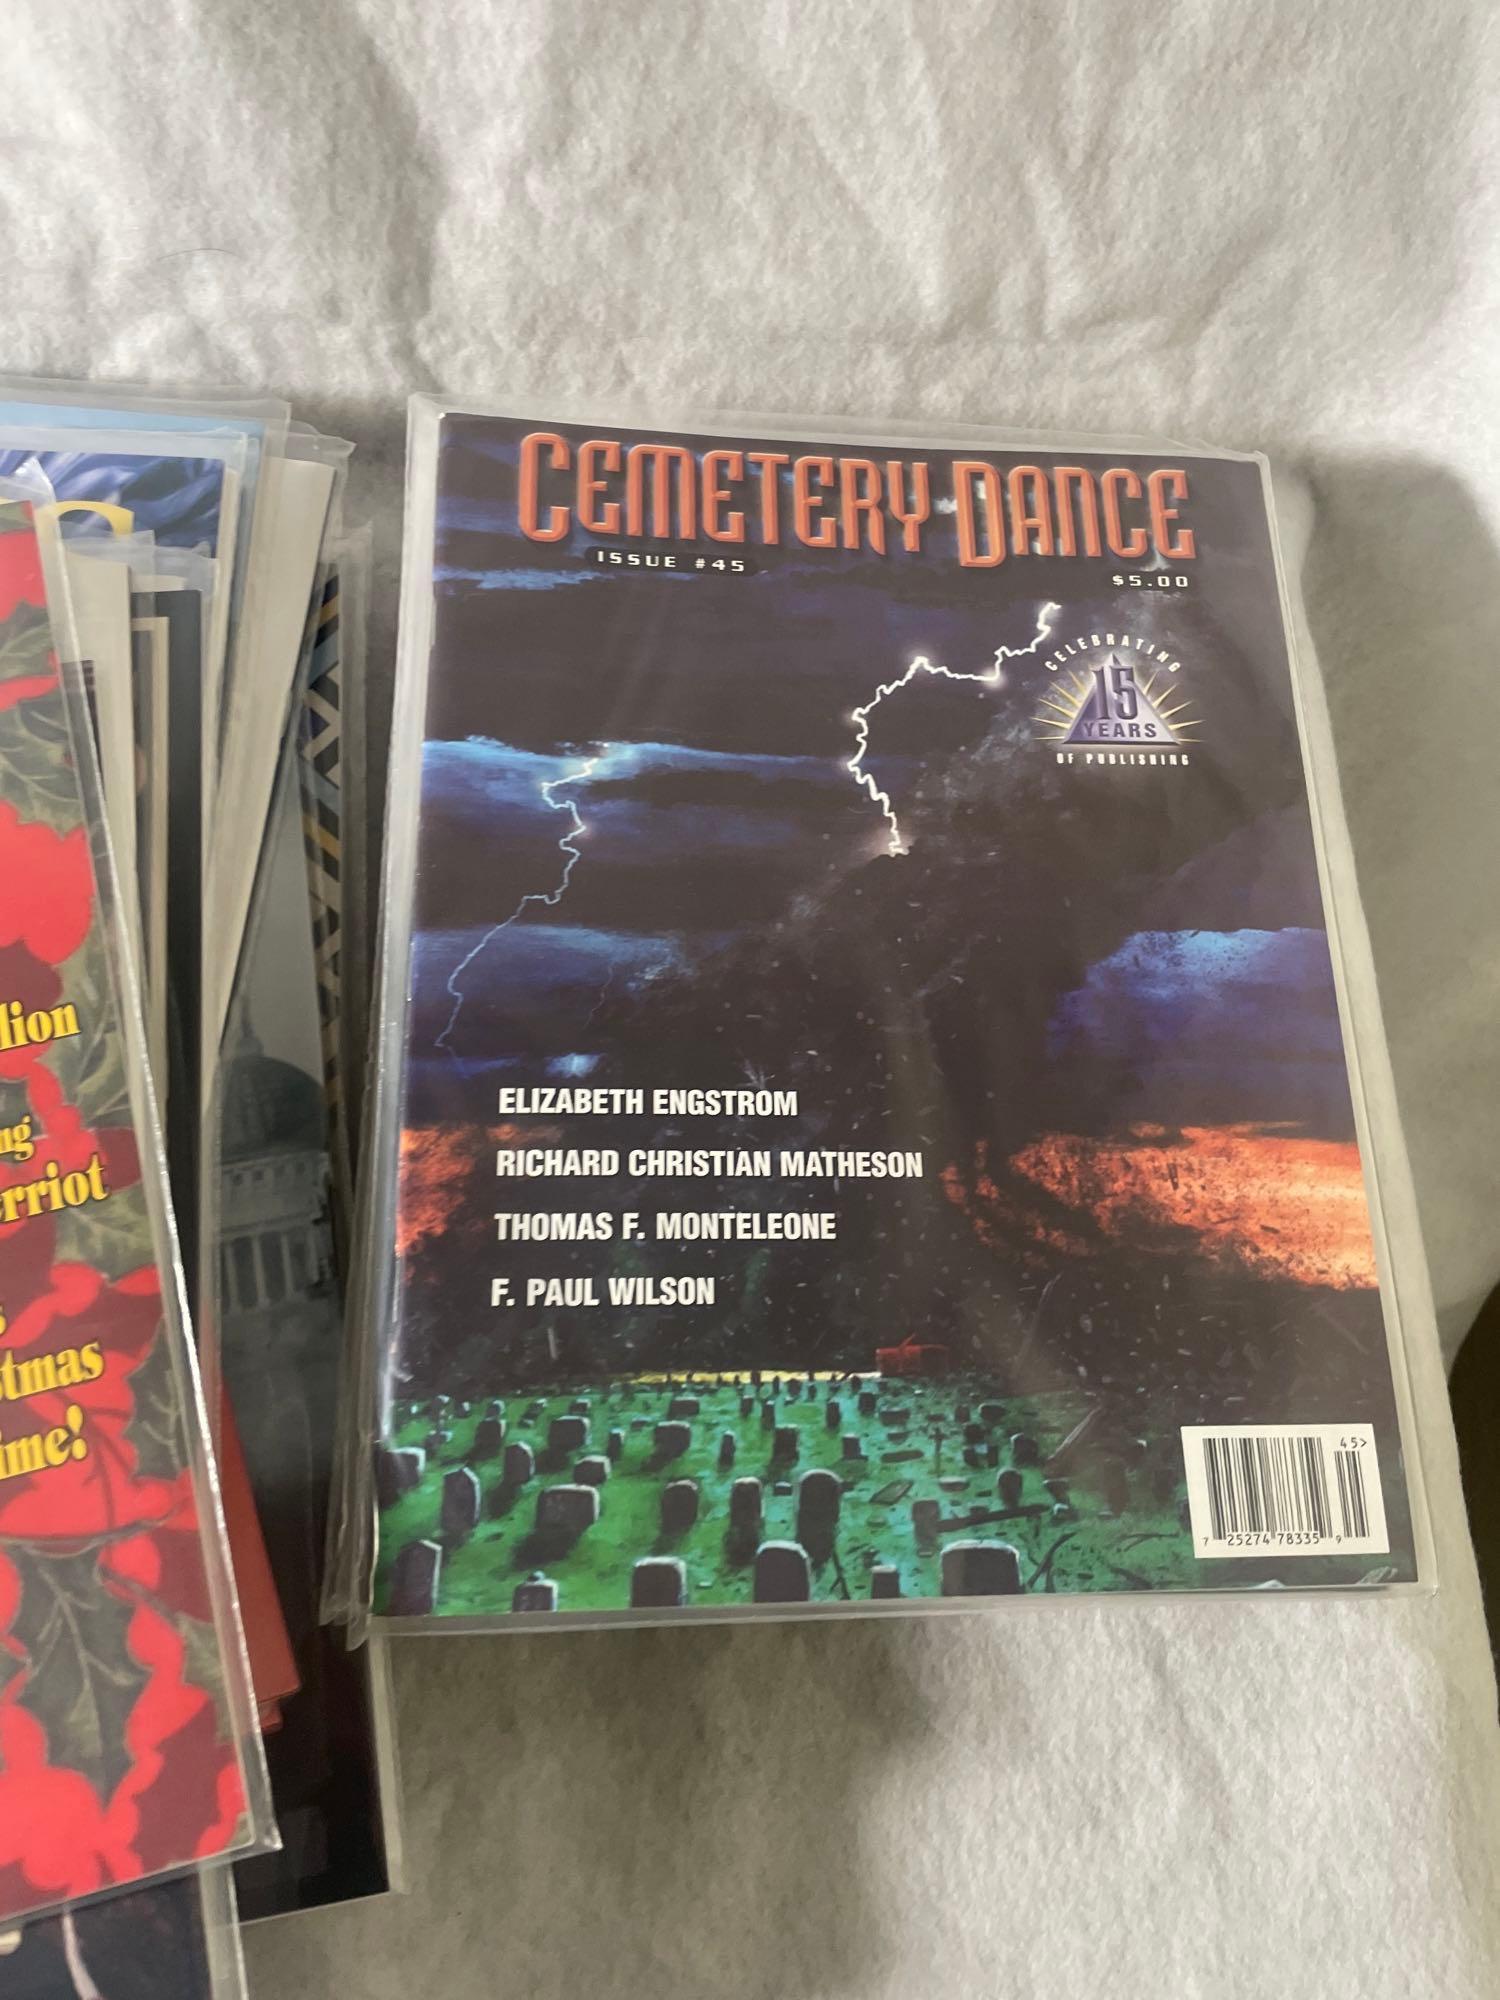 Assorted Book collecting Magazines and Horror Publications